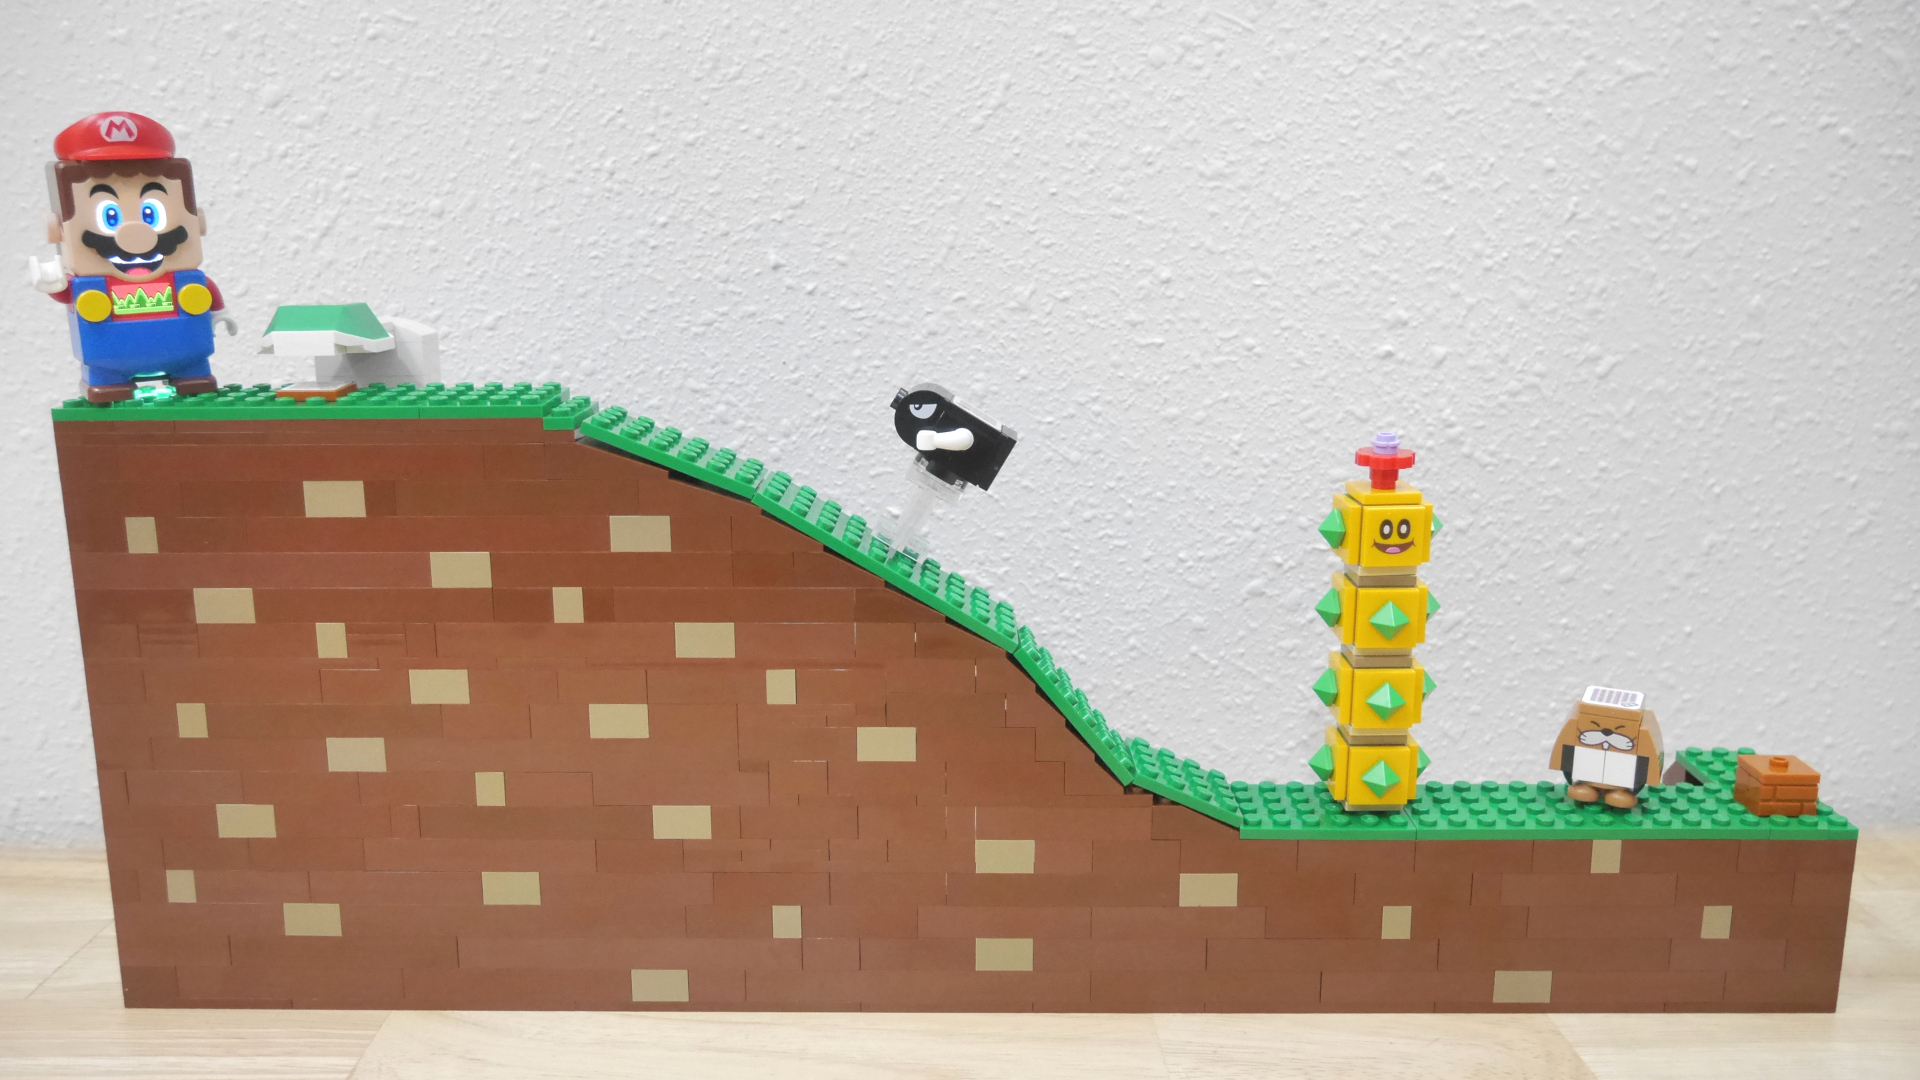 Lego Super Mario looks like a brick-building video game come to life - CNET